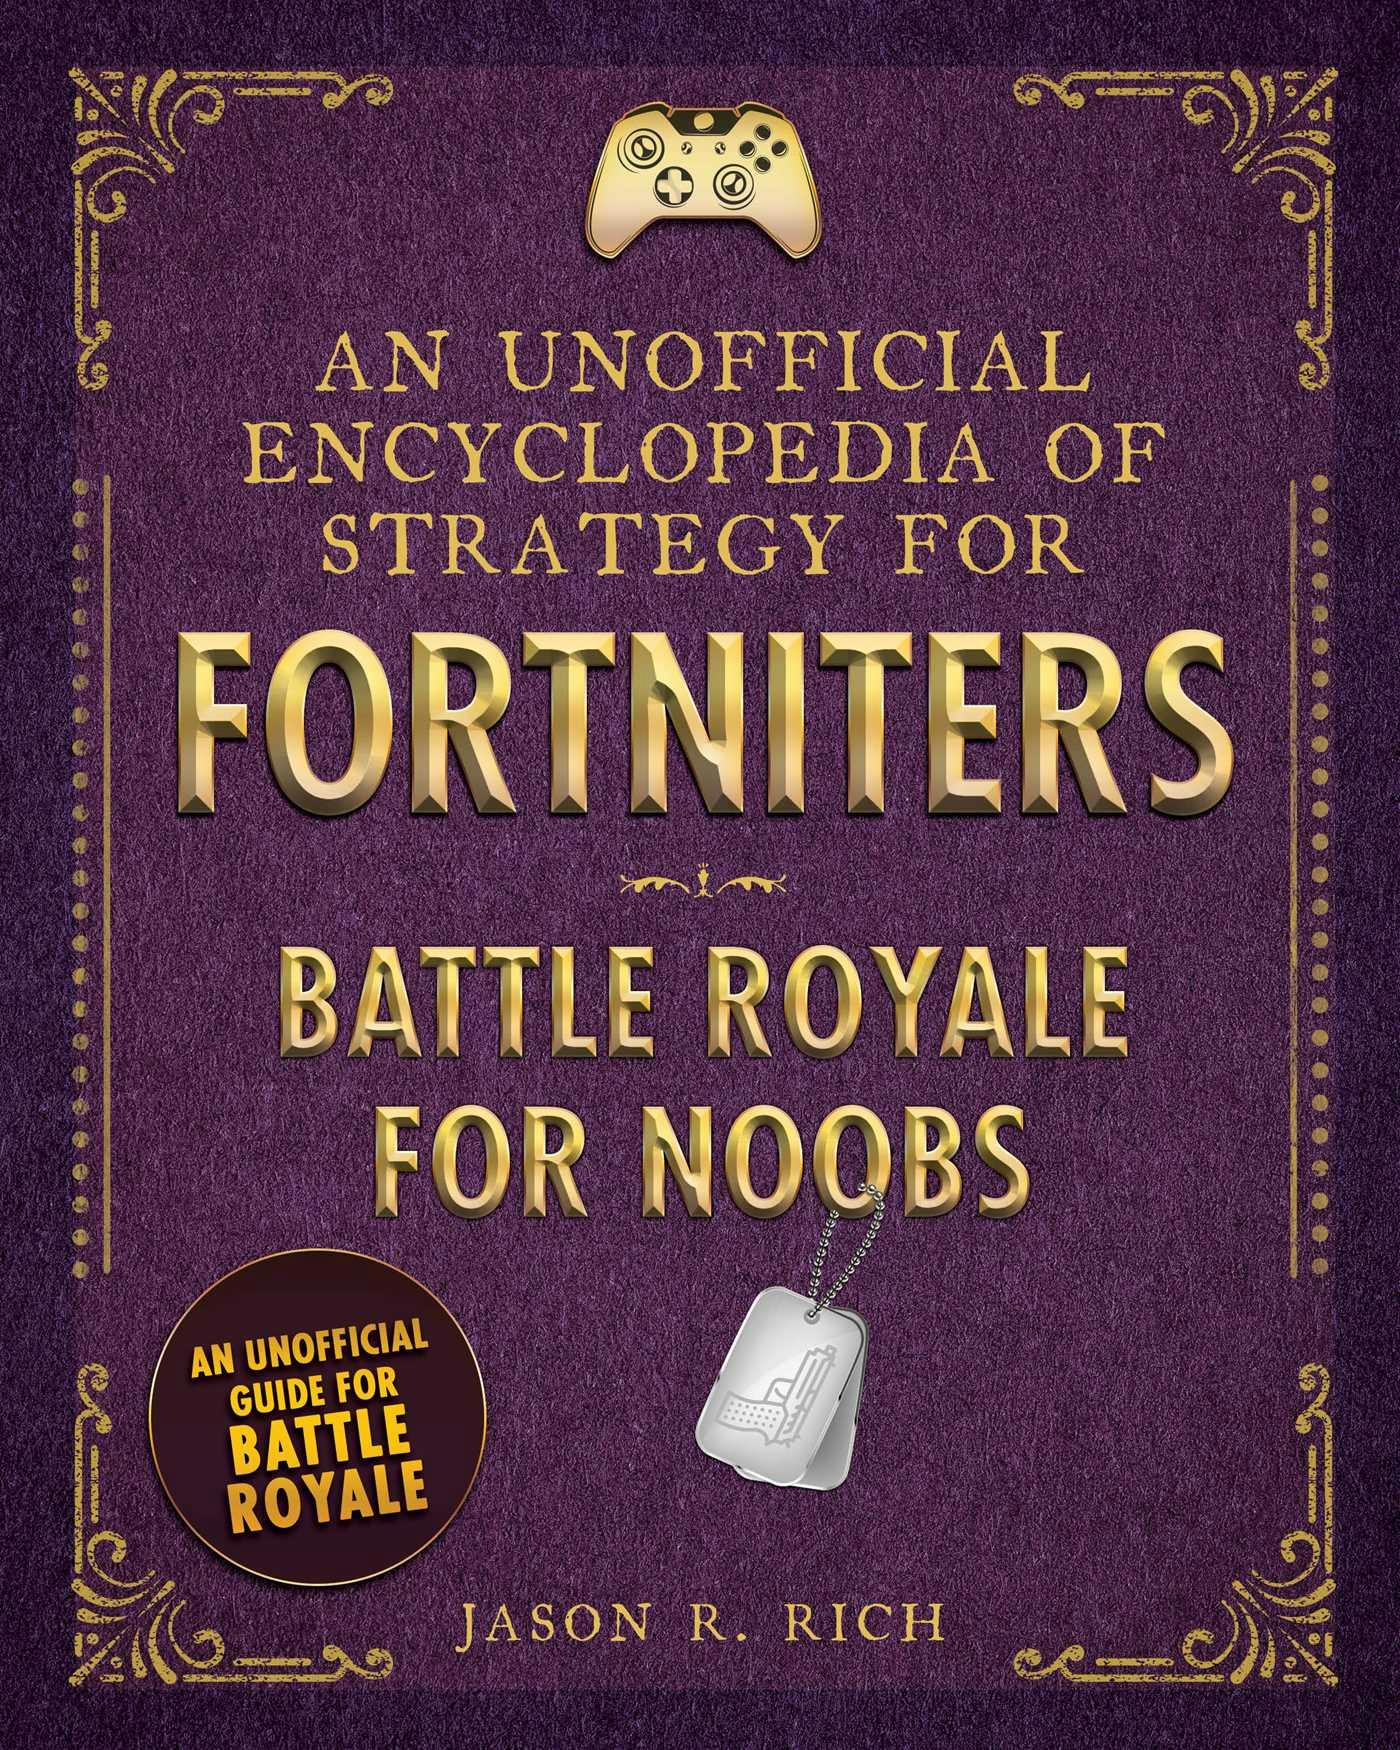 An Unofficial Encyclopedia of Strategy for Fortniters: Battle Royale for Noobs - Jason R. Rich